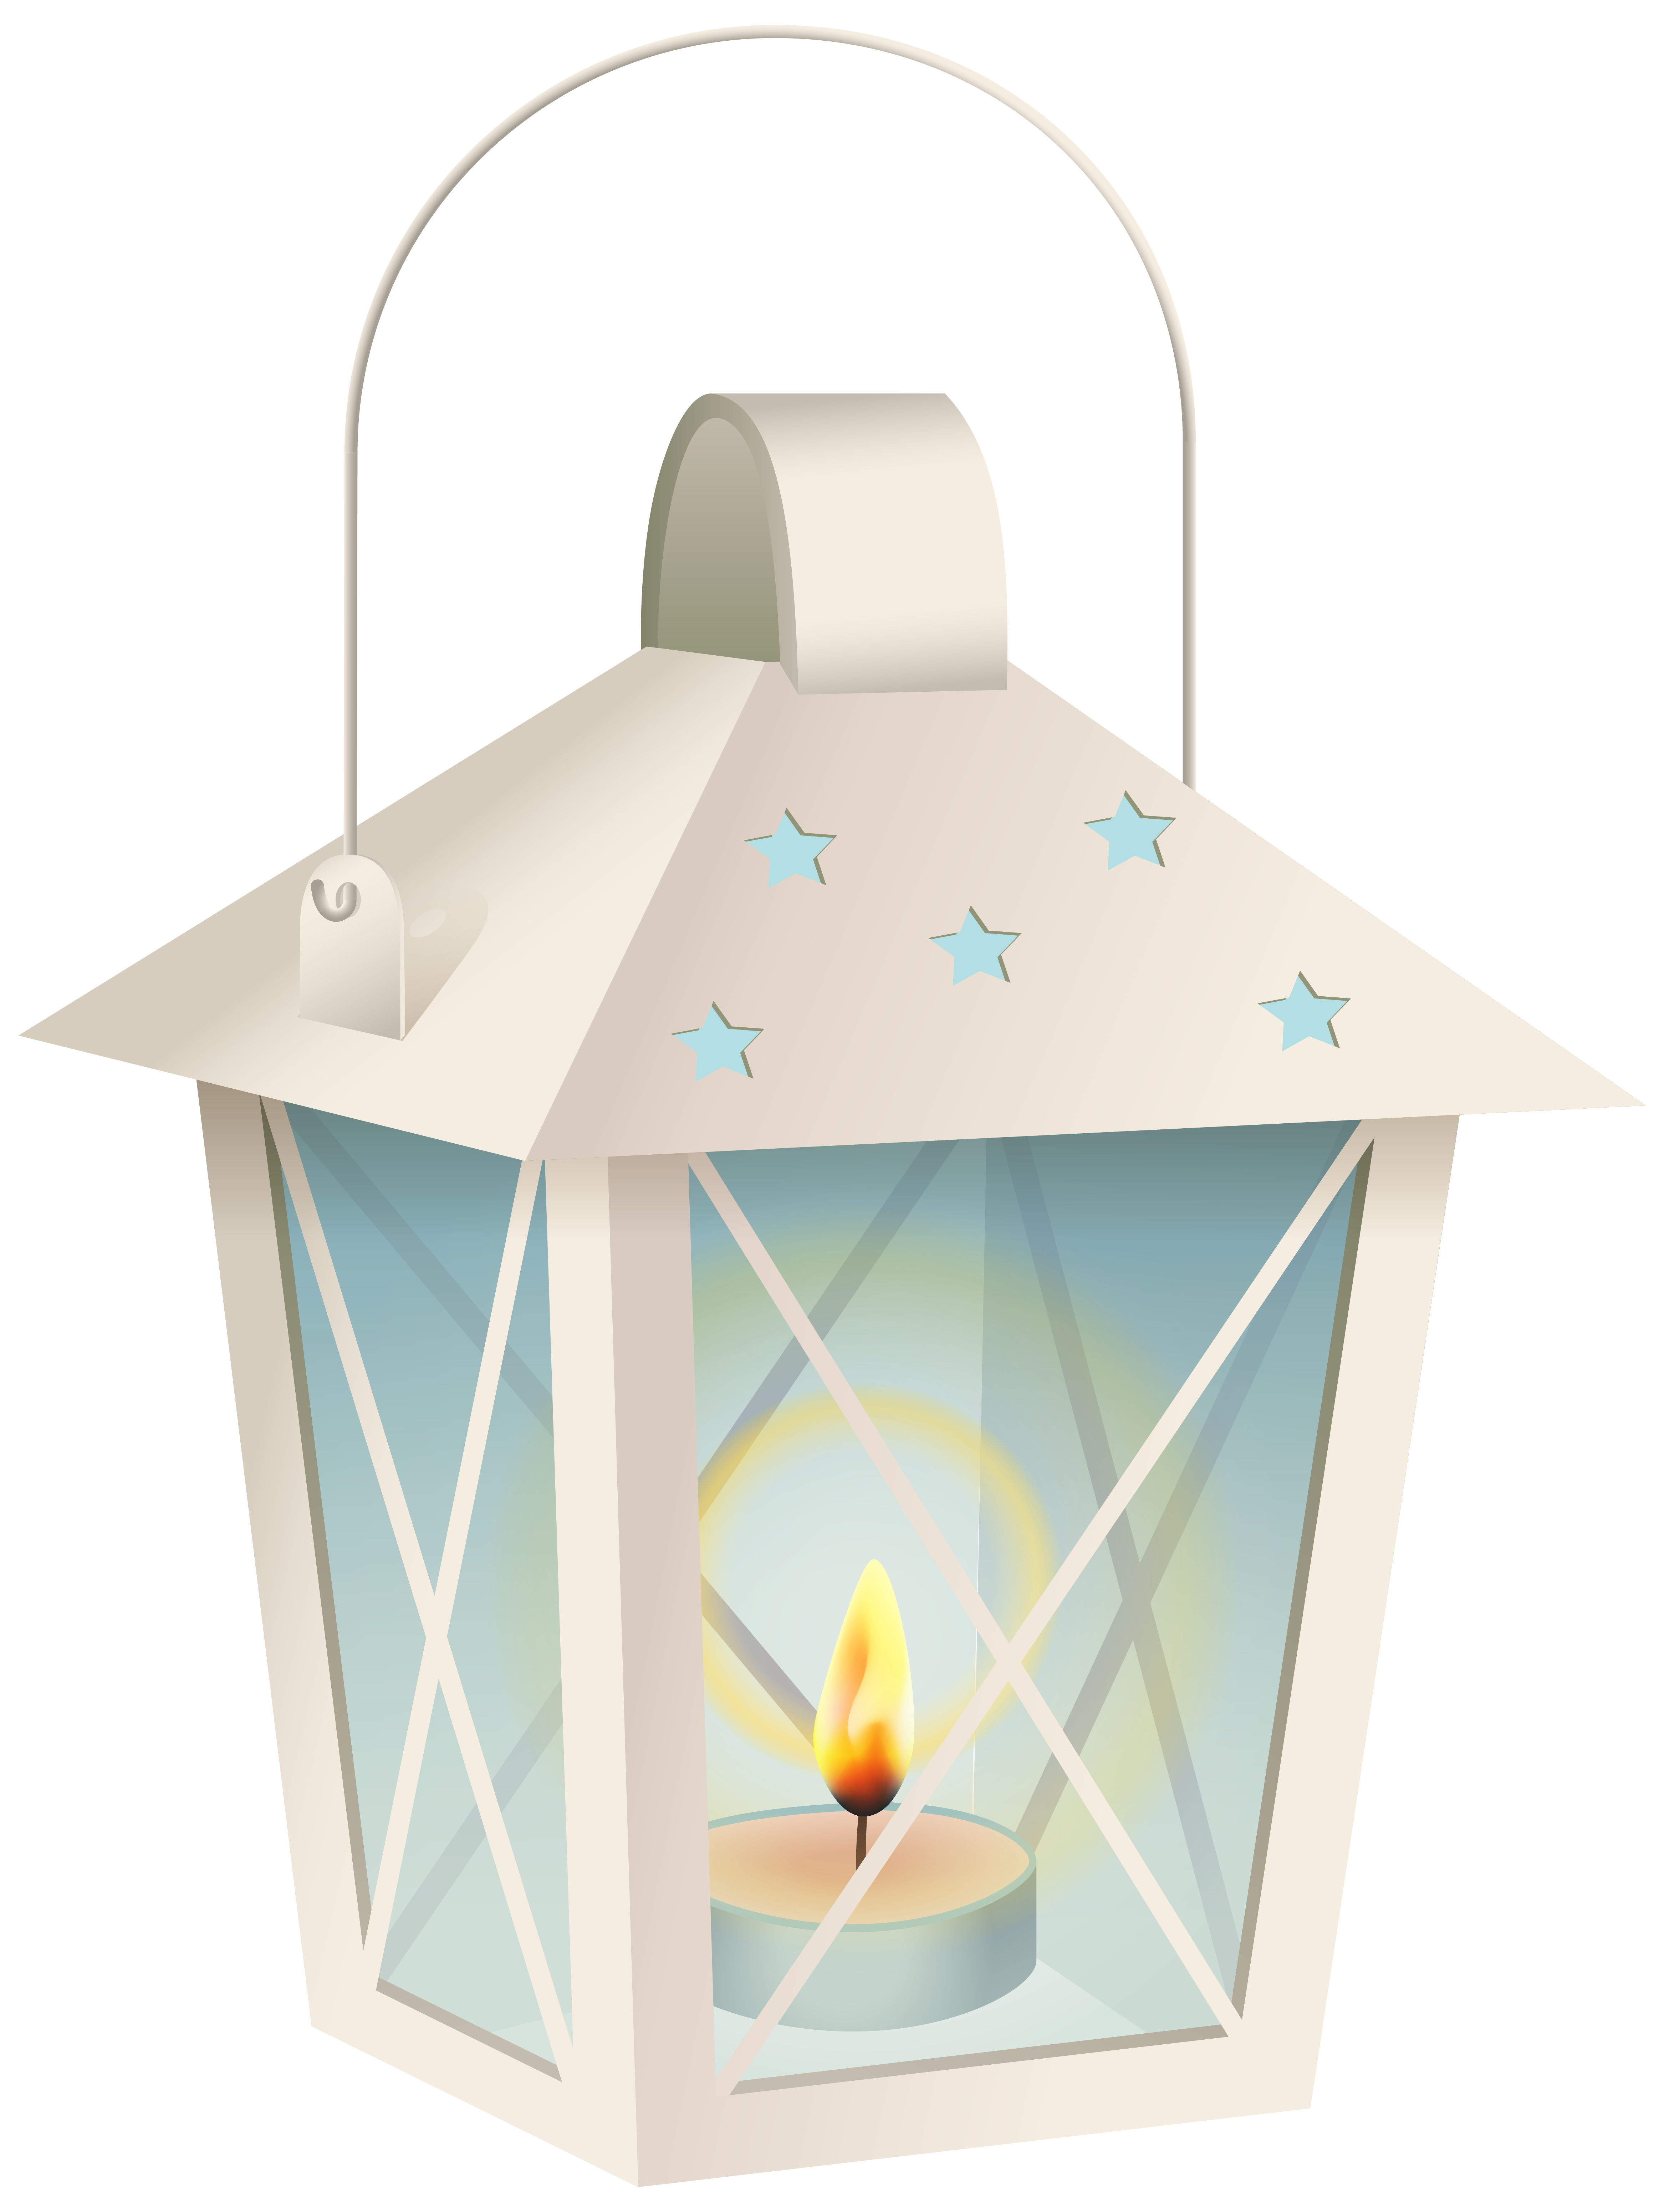 Lantern clipart #5, Download drawings